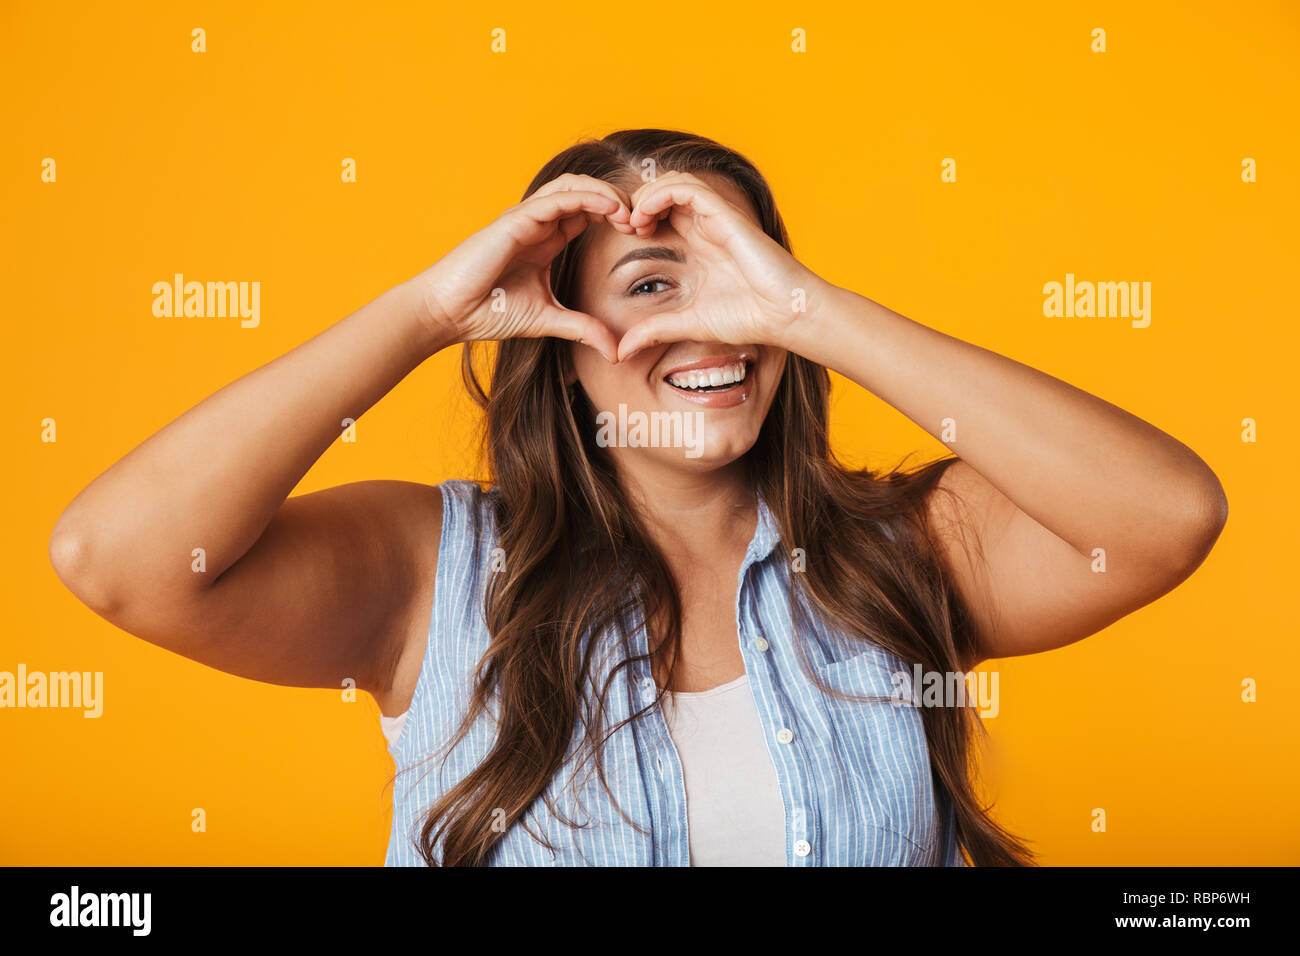 Smiling young overweight woman standing isolated over yellow background, showing heart gesture Stock Photo